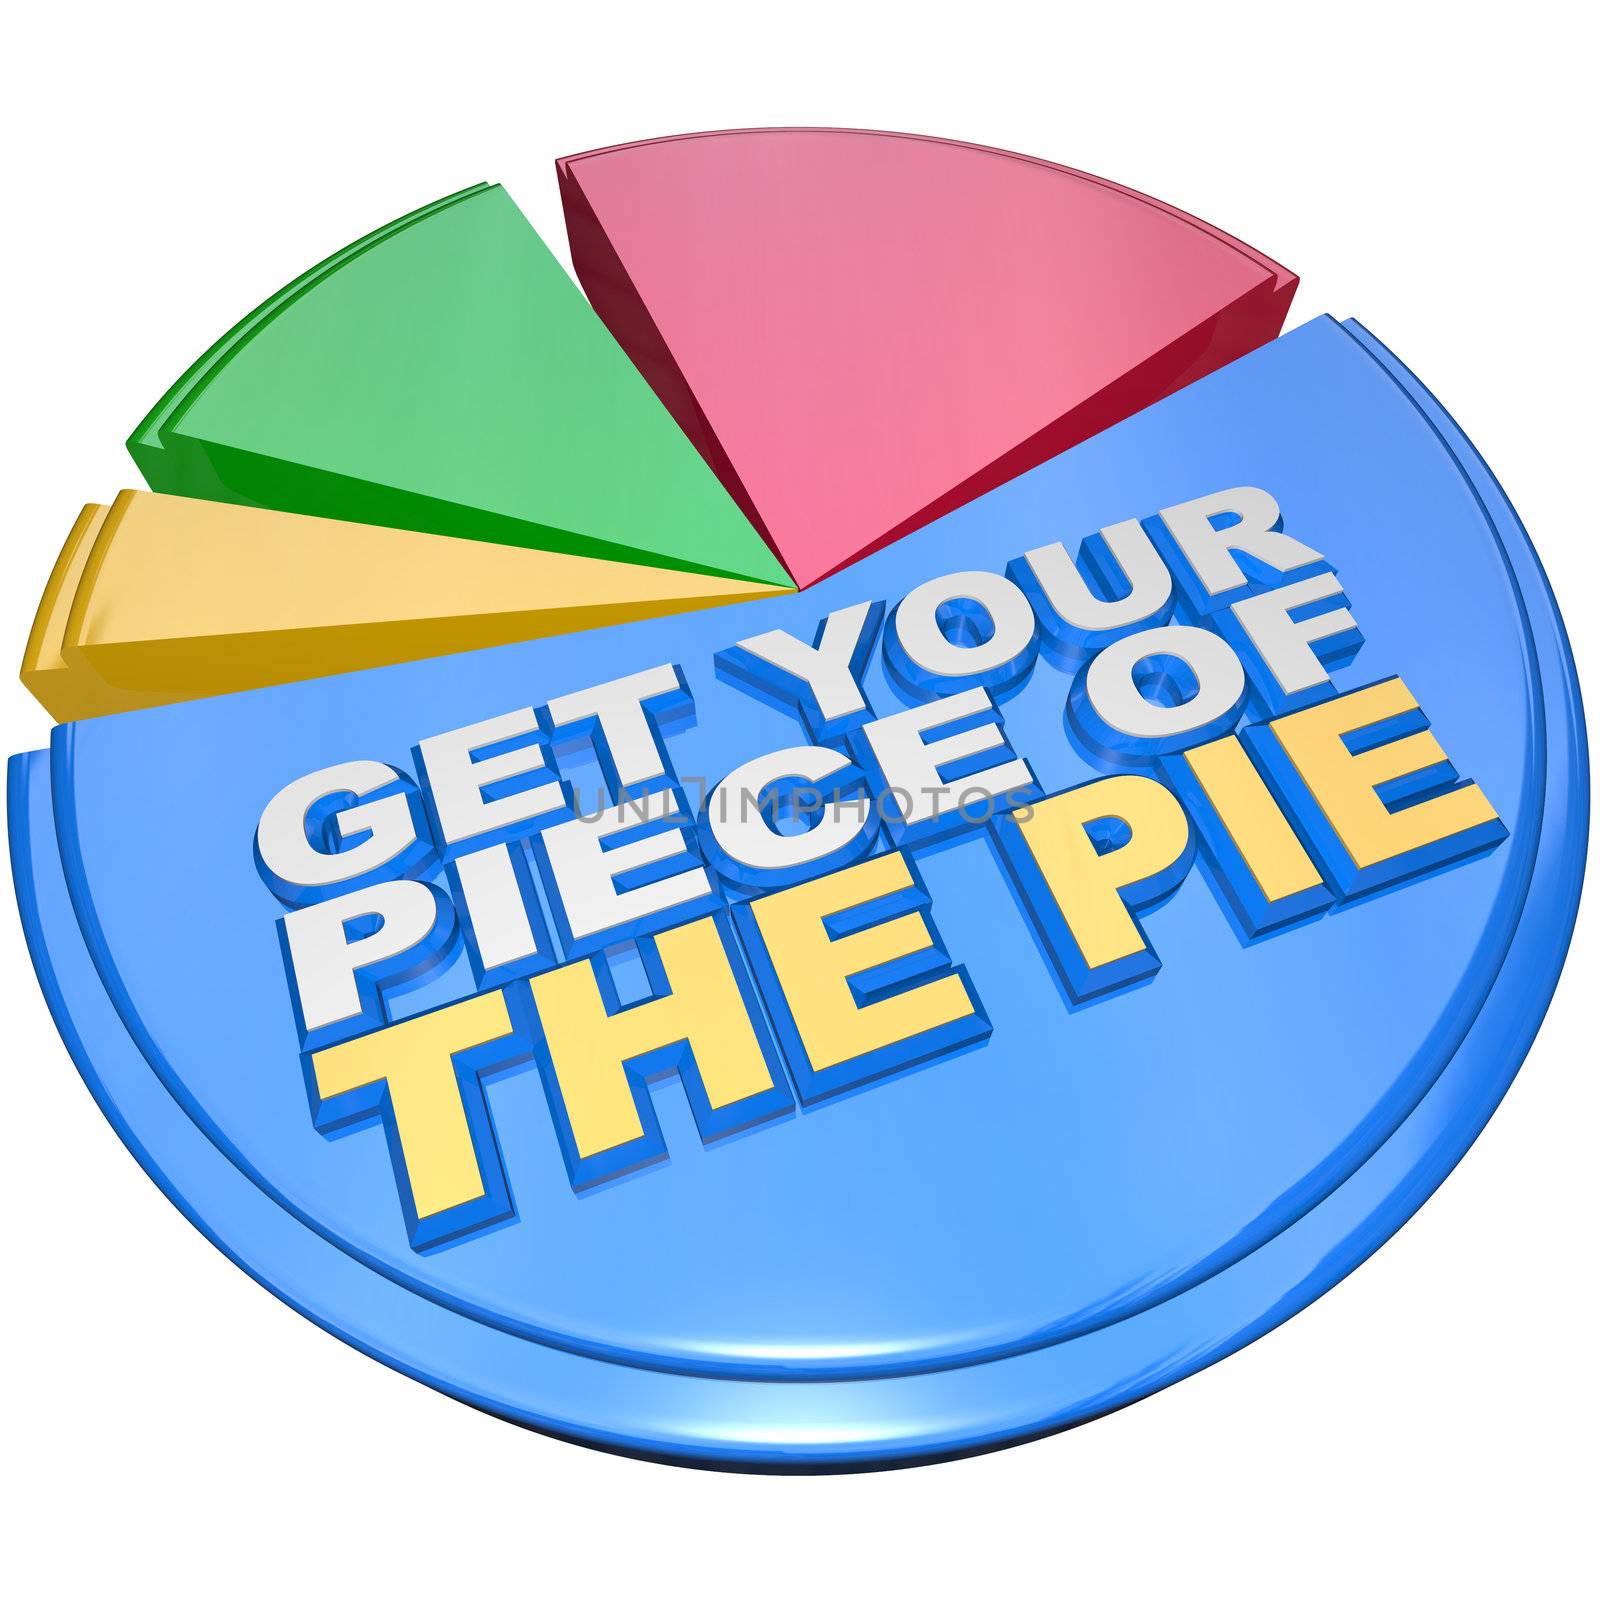 A colorful pie chart measuring share of wealth features the words Get Your Piece of the Pie as encouragement to claim your fair share of money, income and financial wealth